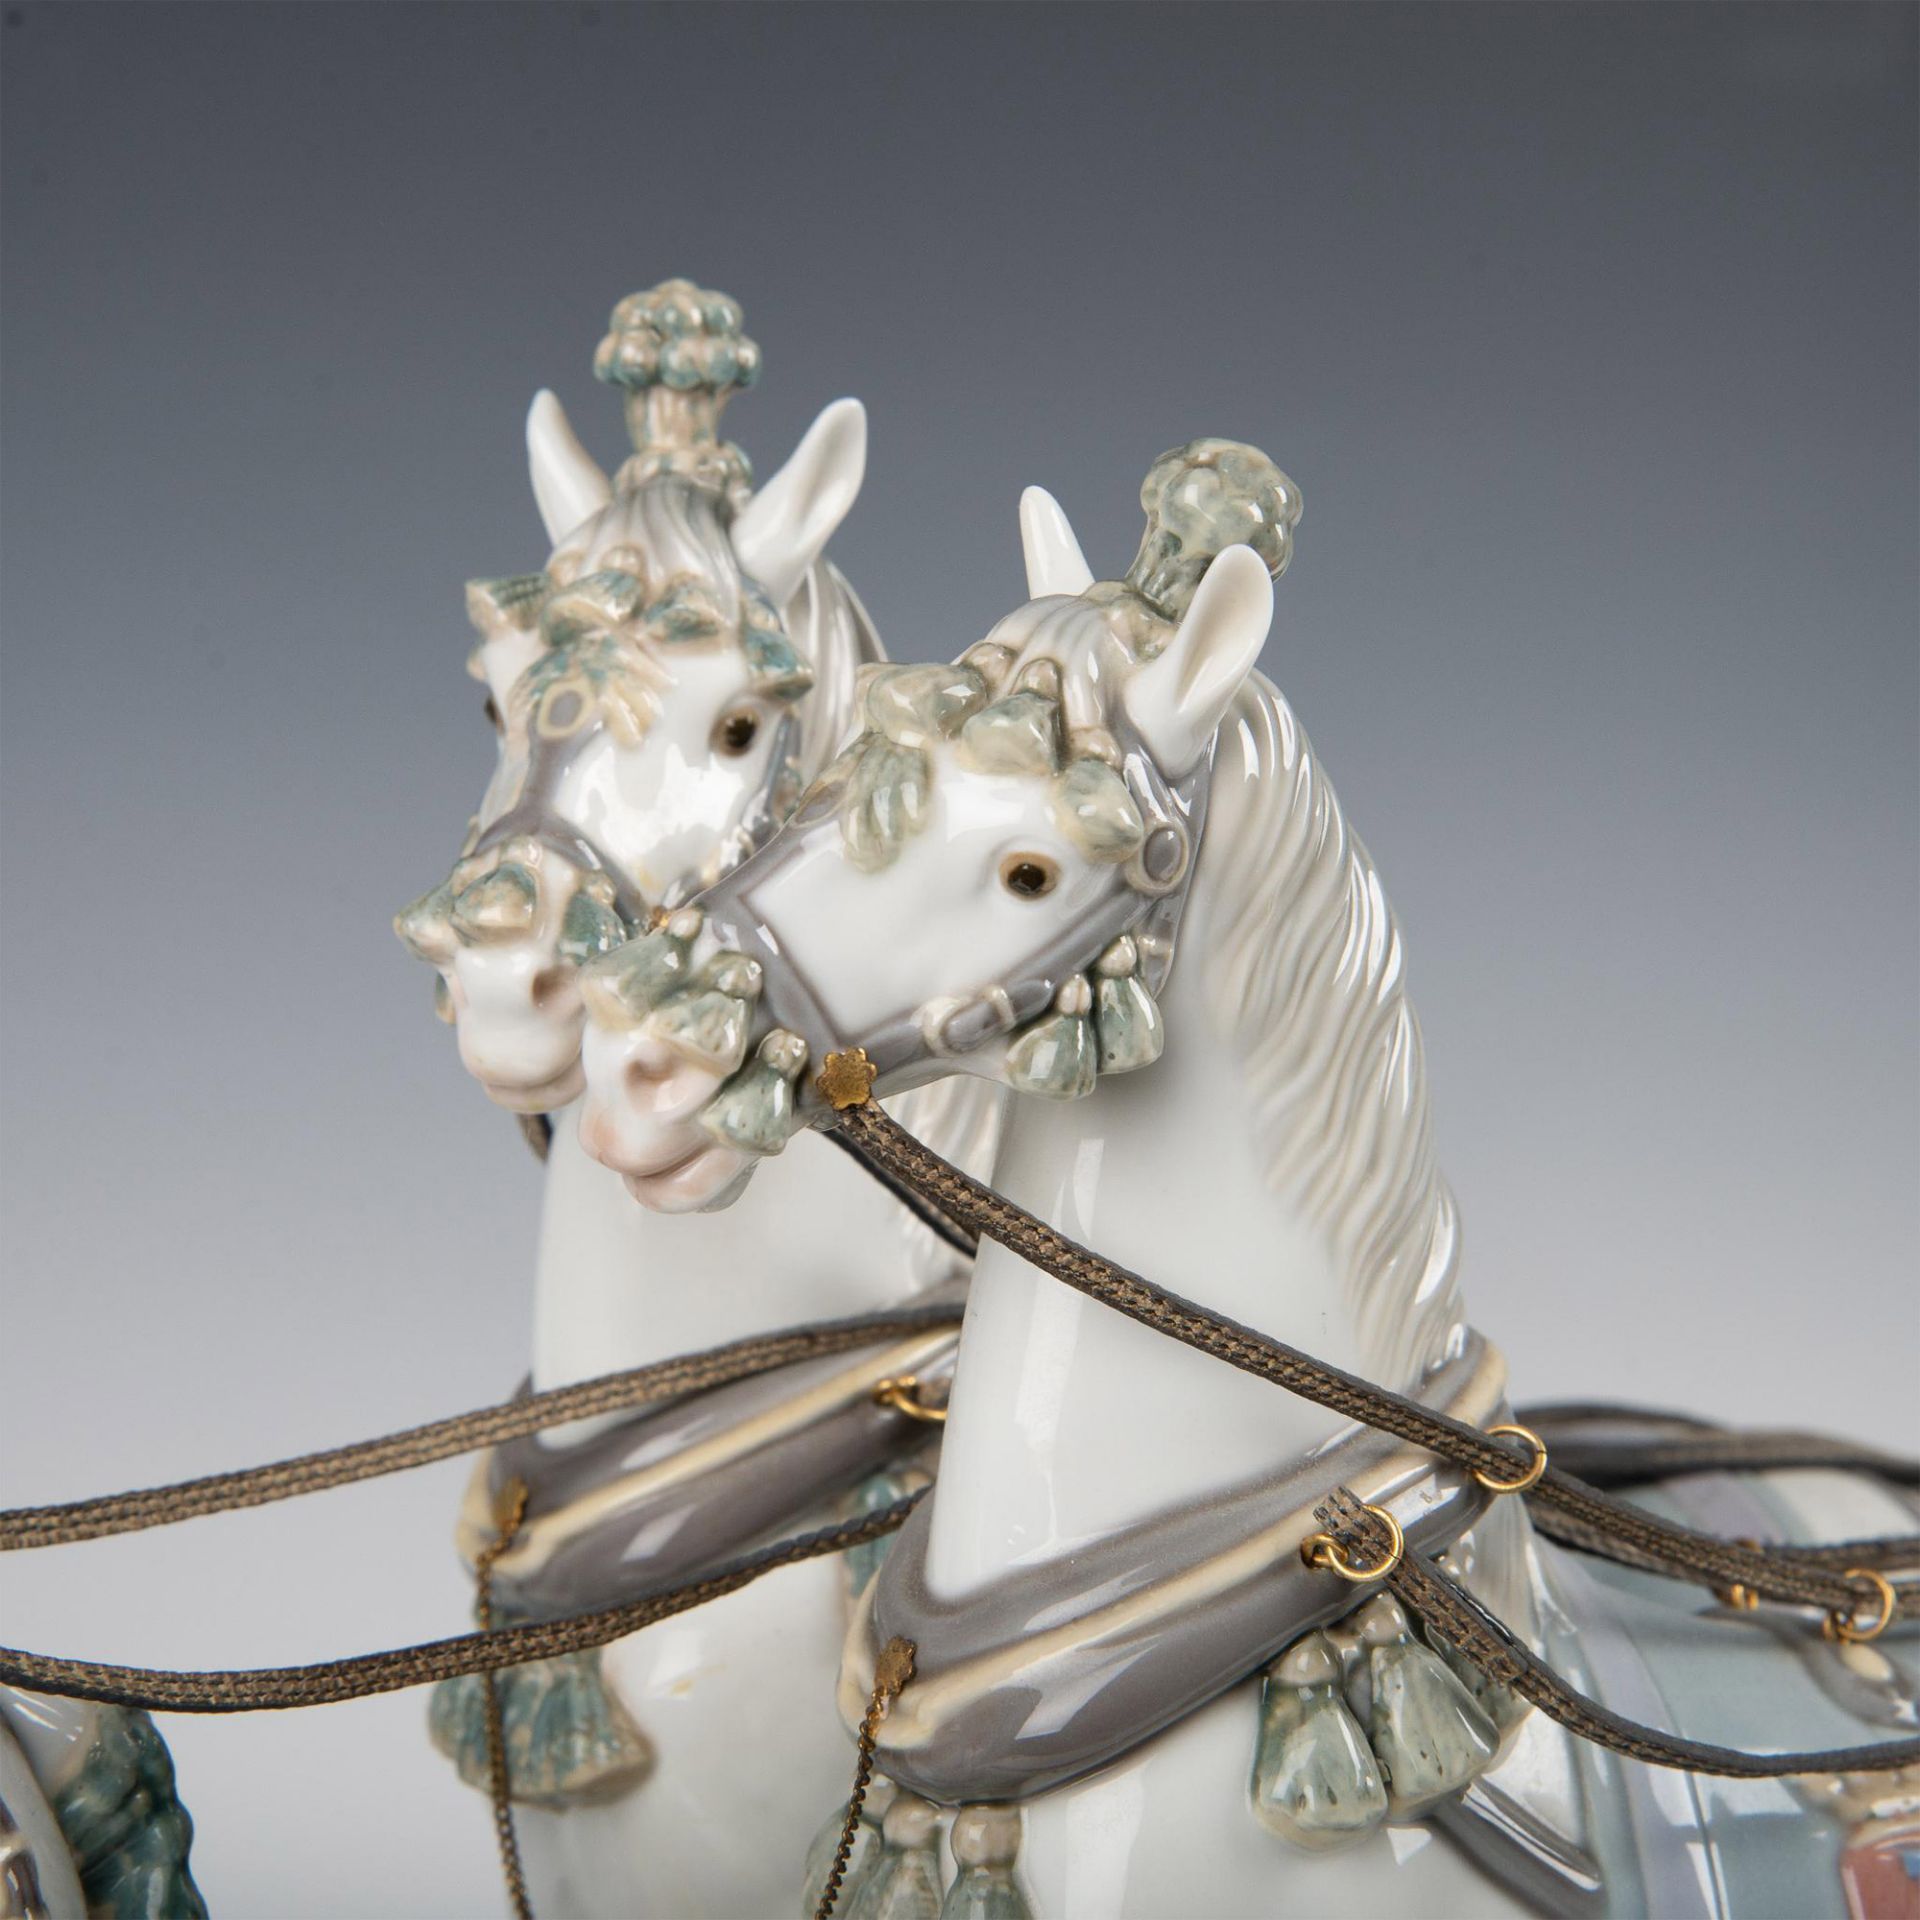 Lladro Porcelain Figurine, Outing in Seville 1001756 - Image 7 of 19